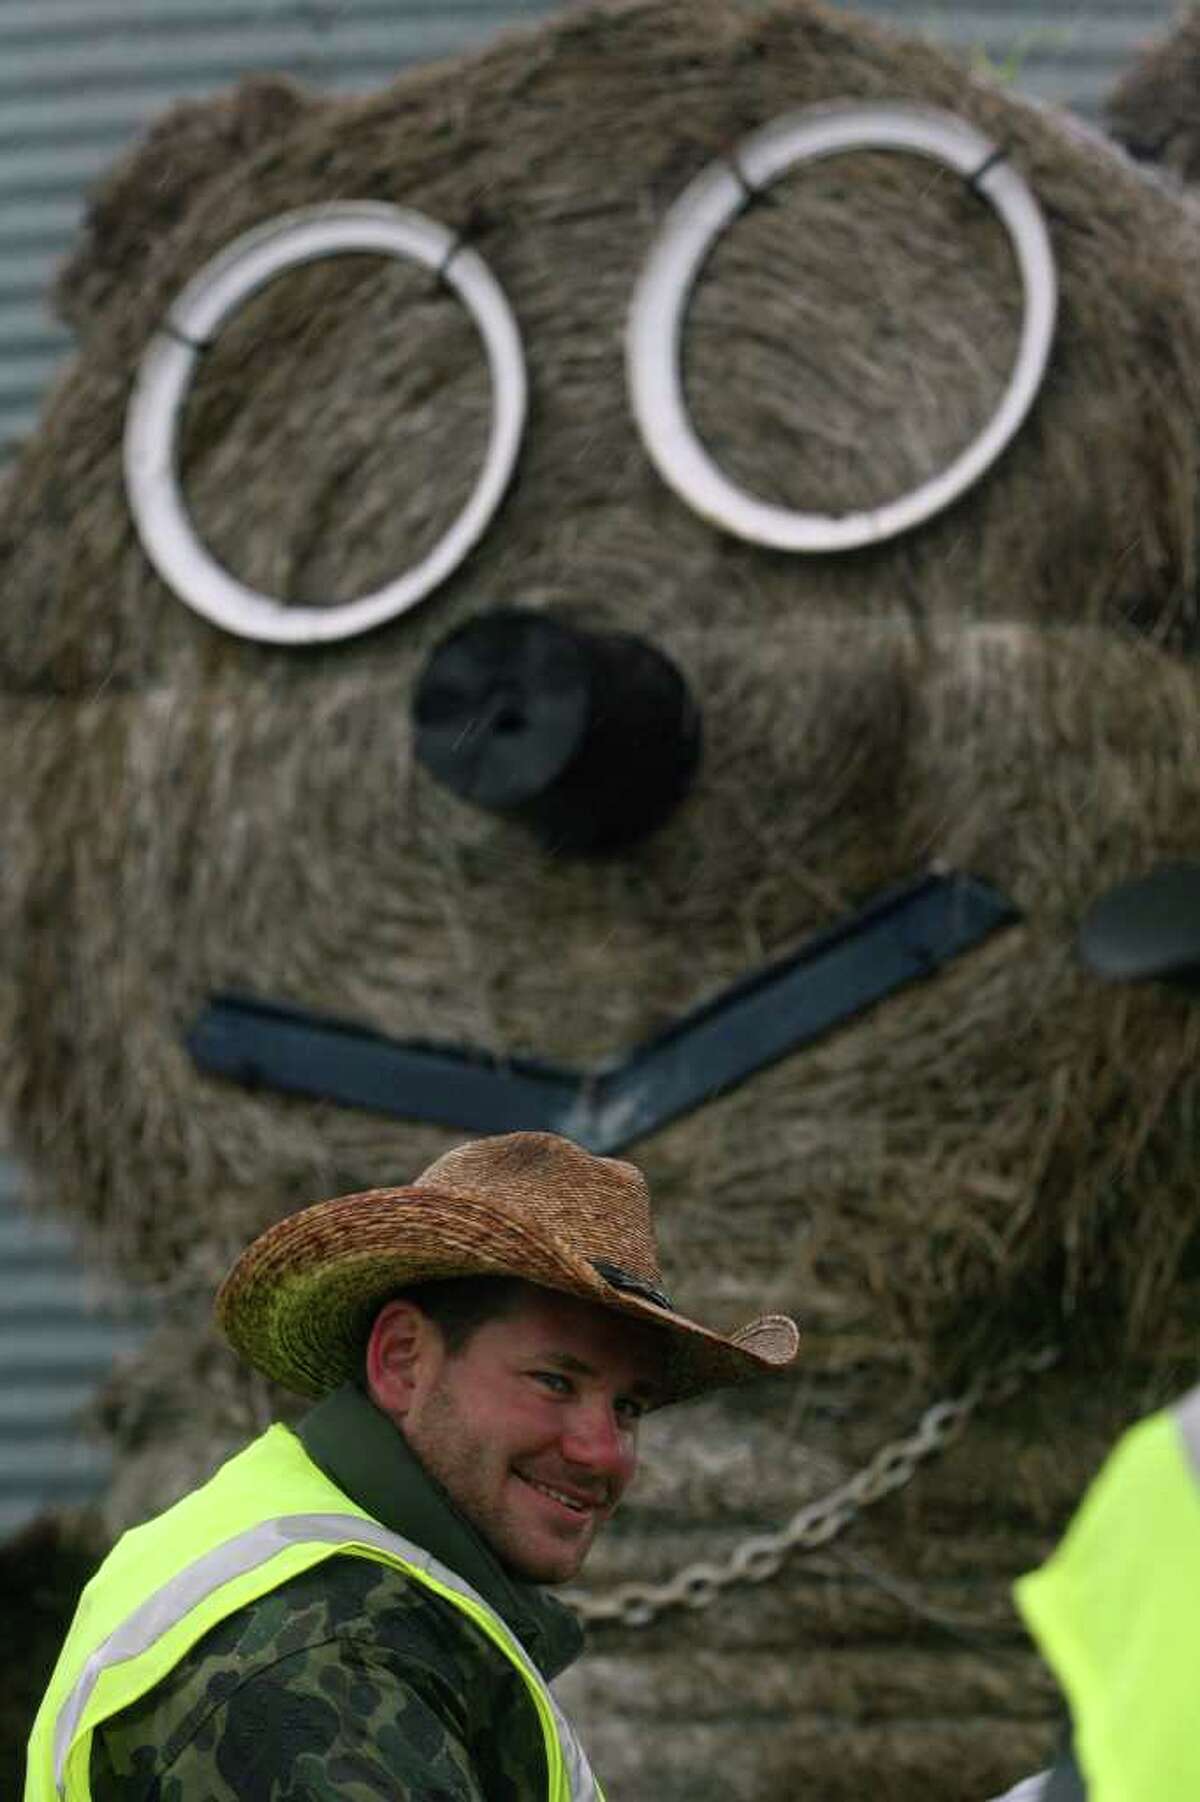 A round bale of hay with a face put on it looms over an area where the Mesquite Traildrivers stopped for a morning break while en route to San Antonio. JOHN DAVENPORT/jdavenport@express-news.net